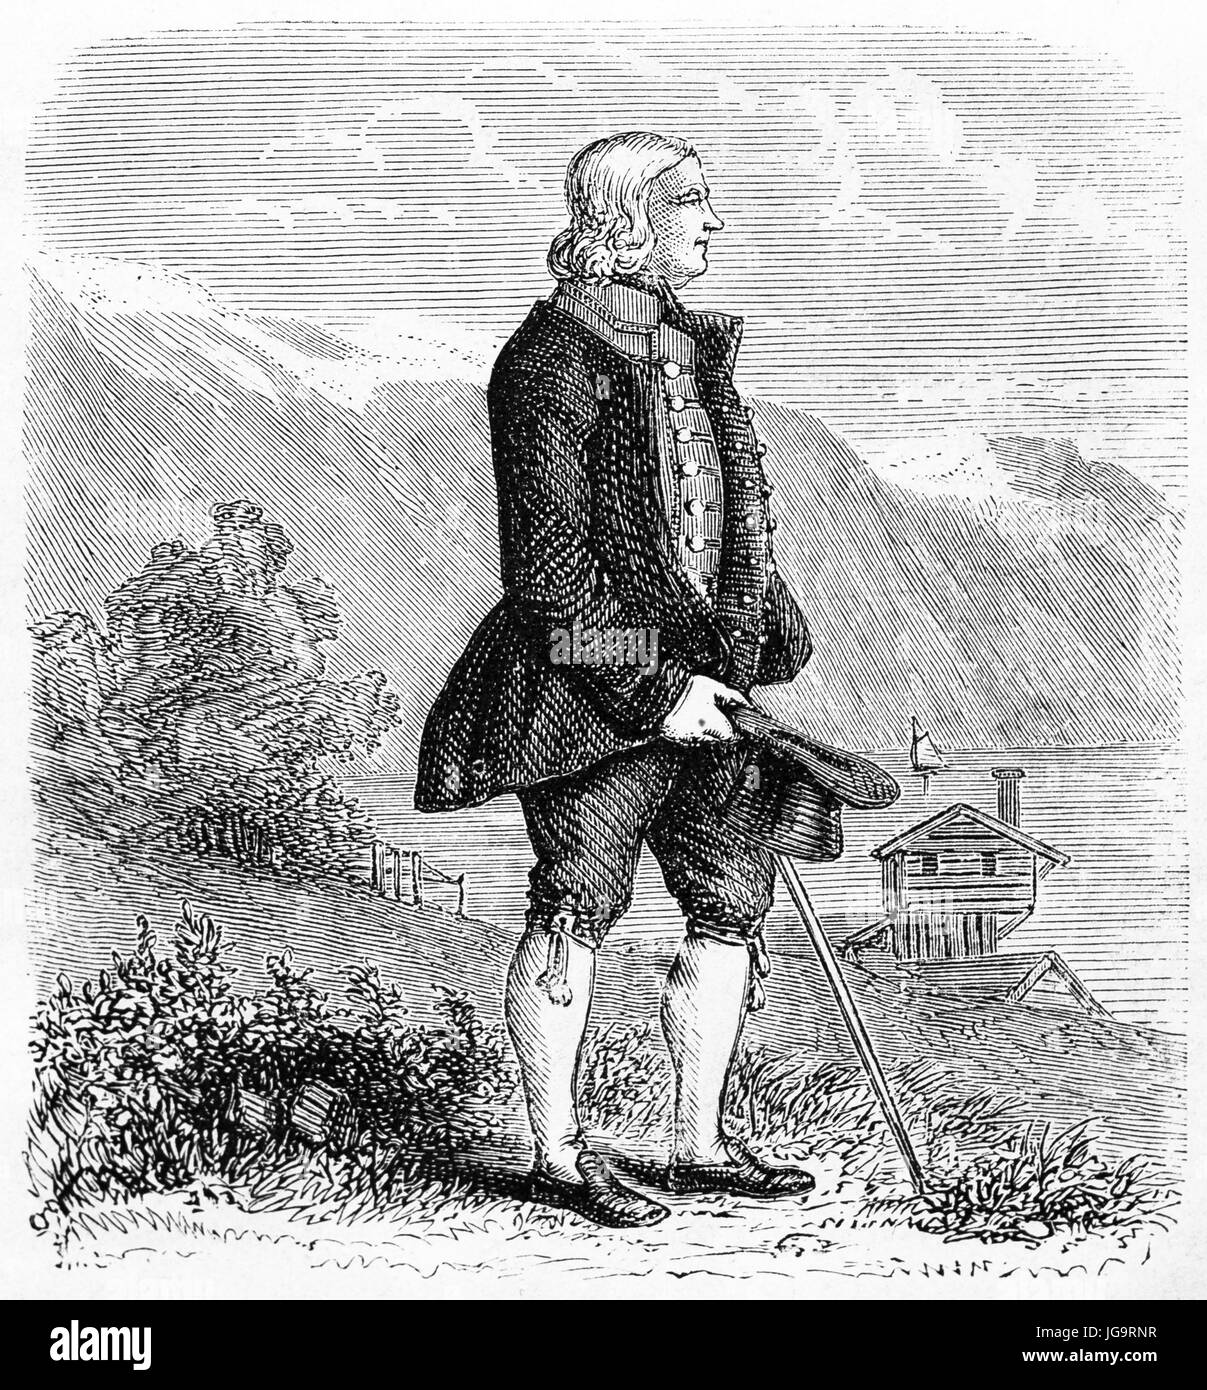 full body portrait of Bourgeois in Stavanger in elegant clothes posing outdoor over a natural landscape, Norway. Etching style art by Huyot, 1861 Stock Photo